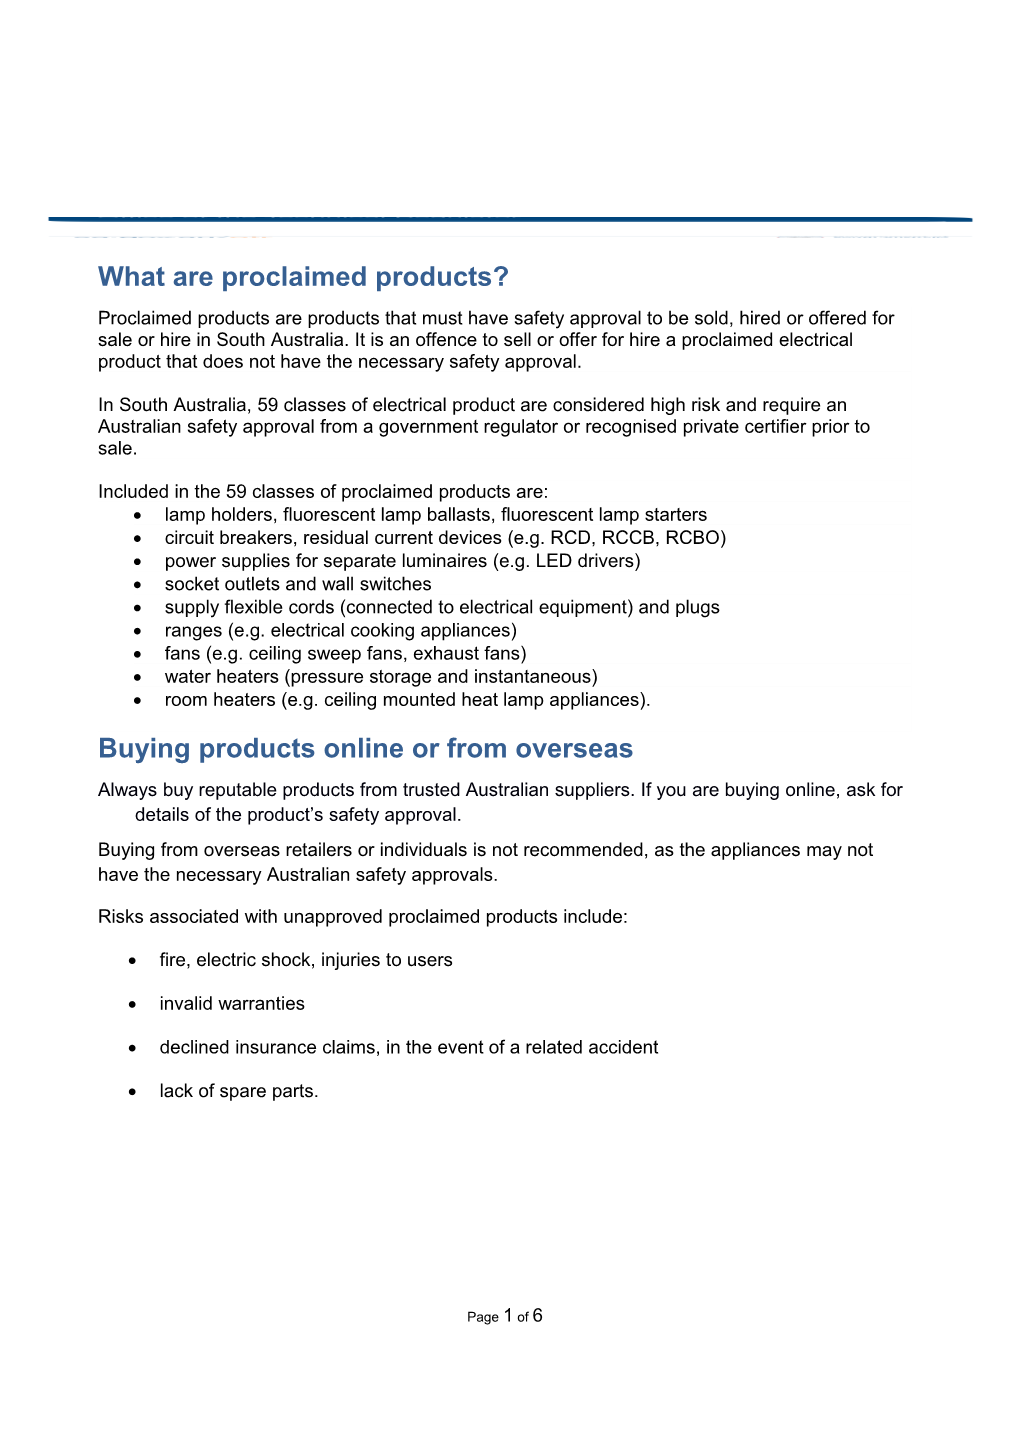 What Are Proclaimed Products?